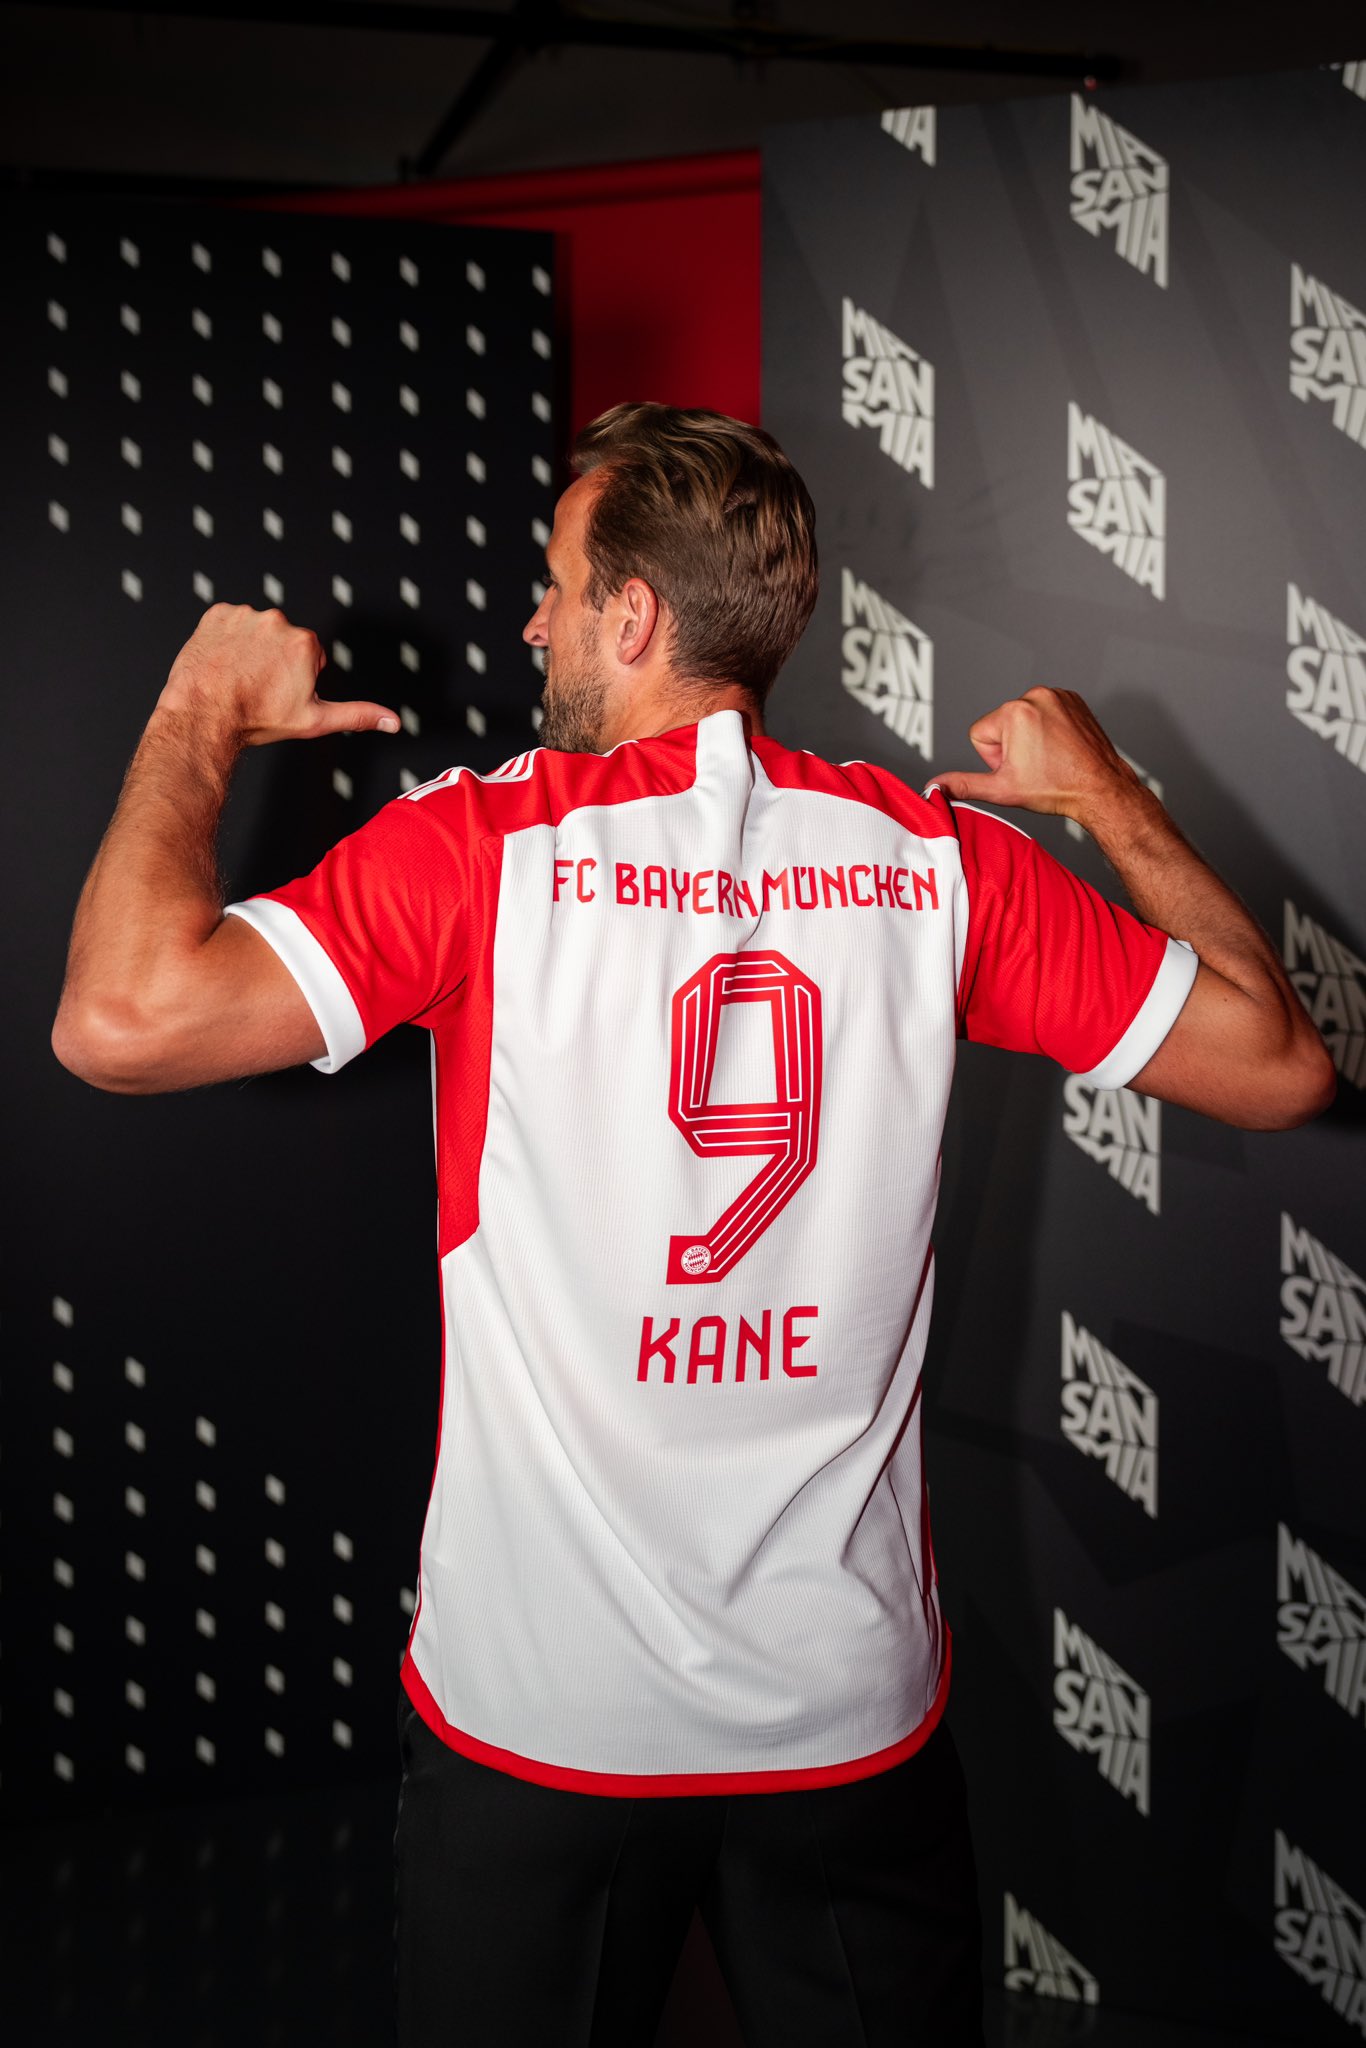 Harry Kane completes £100m move to Bayern Munich from Tottenham (Photos)